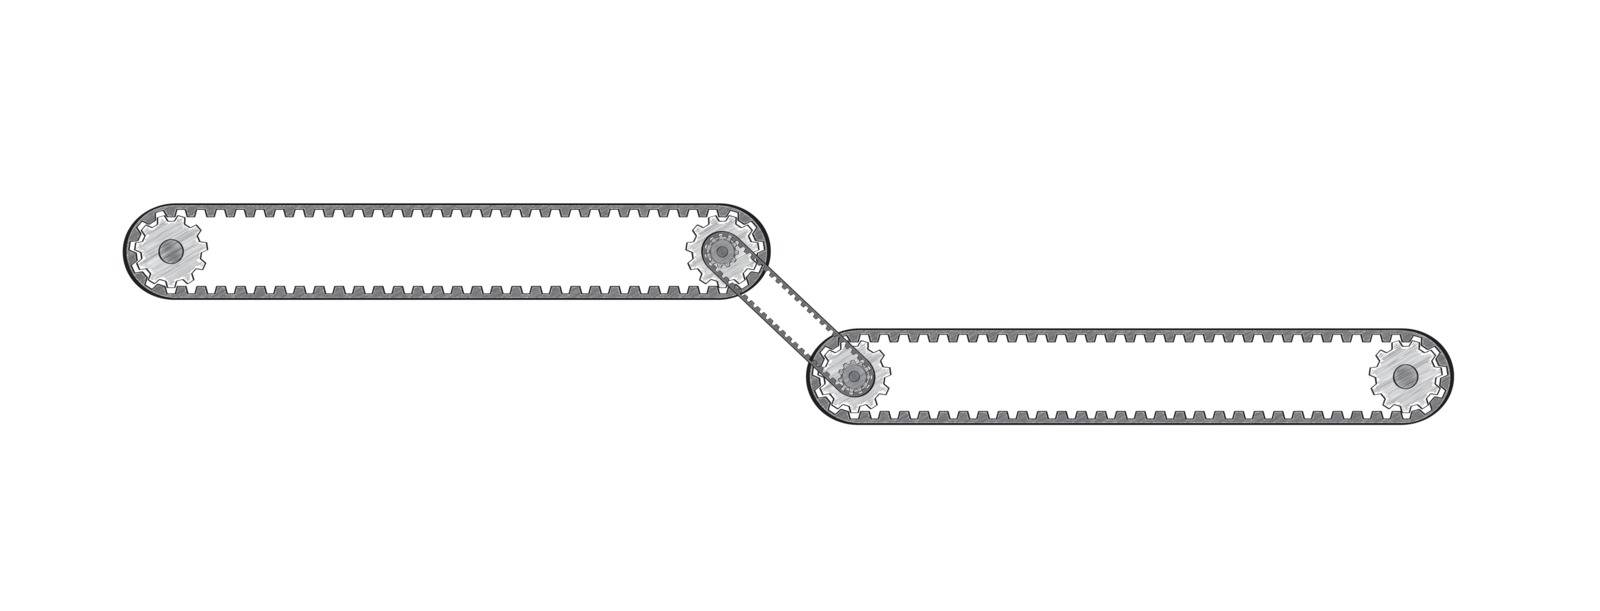 two connected conveyor belts with two cogwheels, crosshatched image